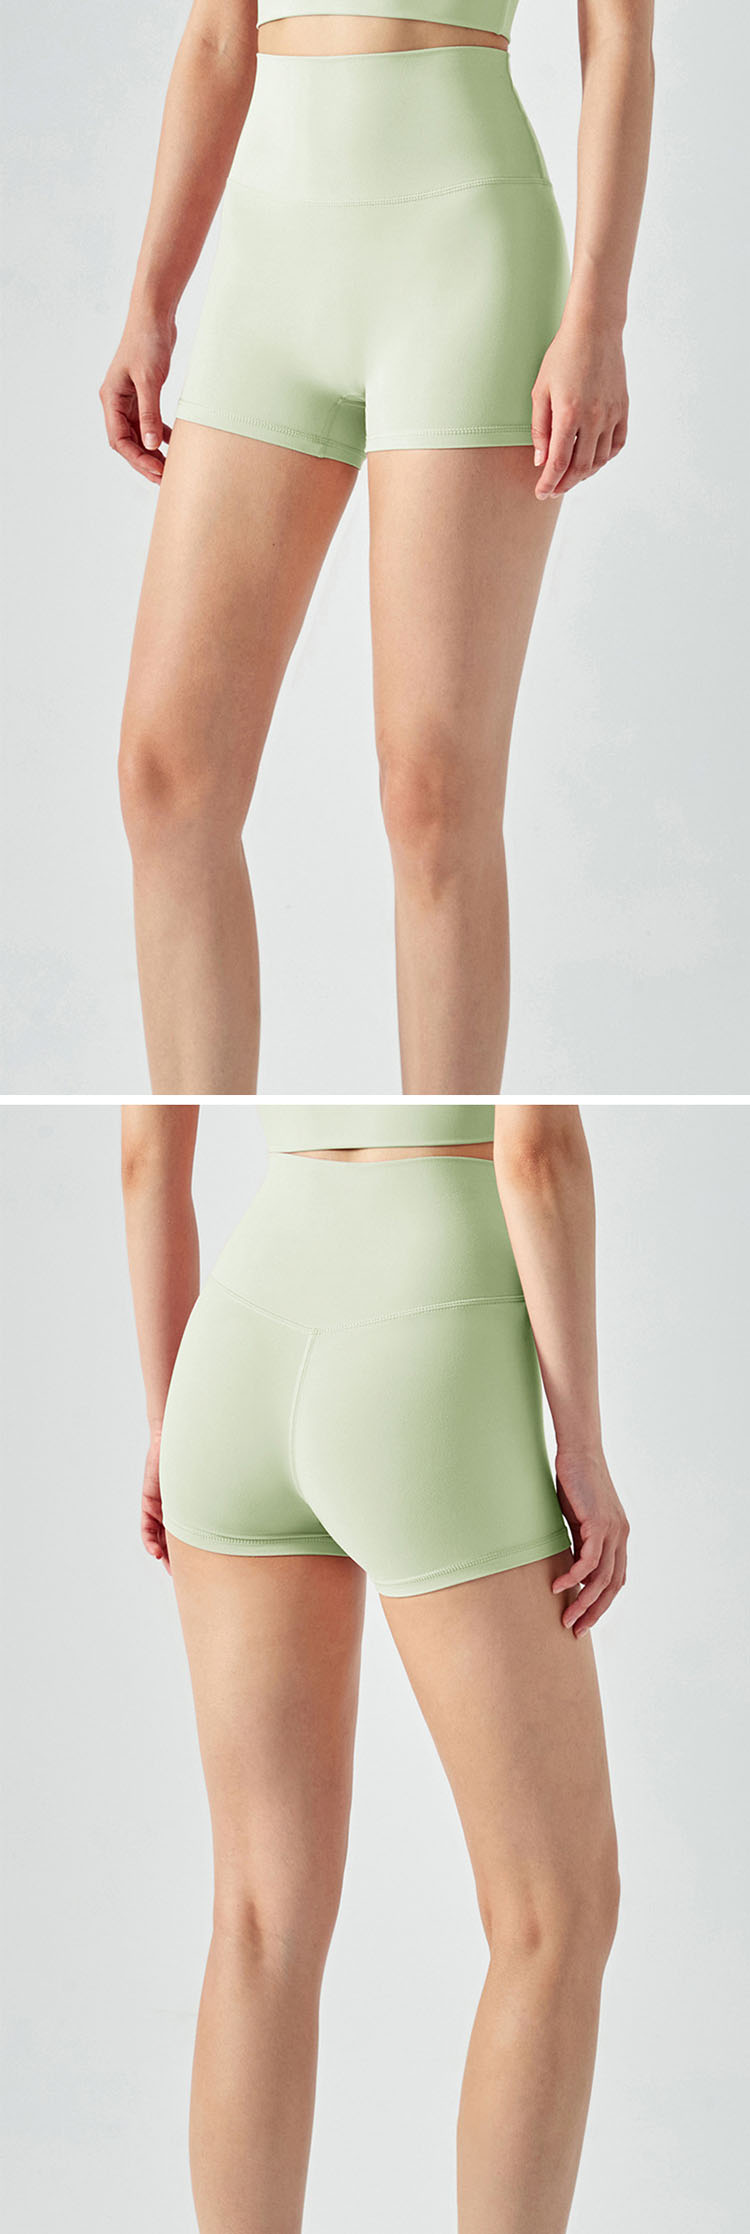 Made of high-stretch fabric, it fits tightly to the thigh and does not wear out during movement